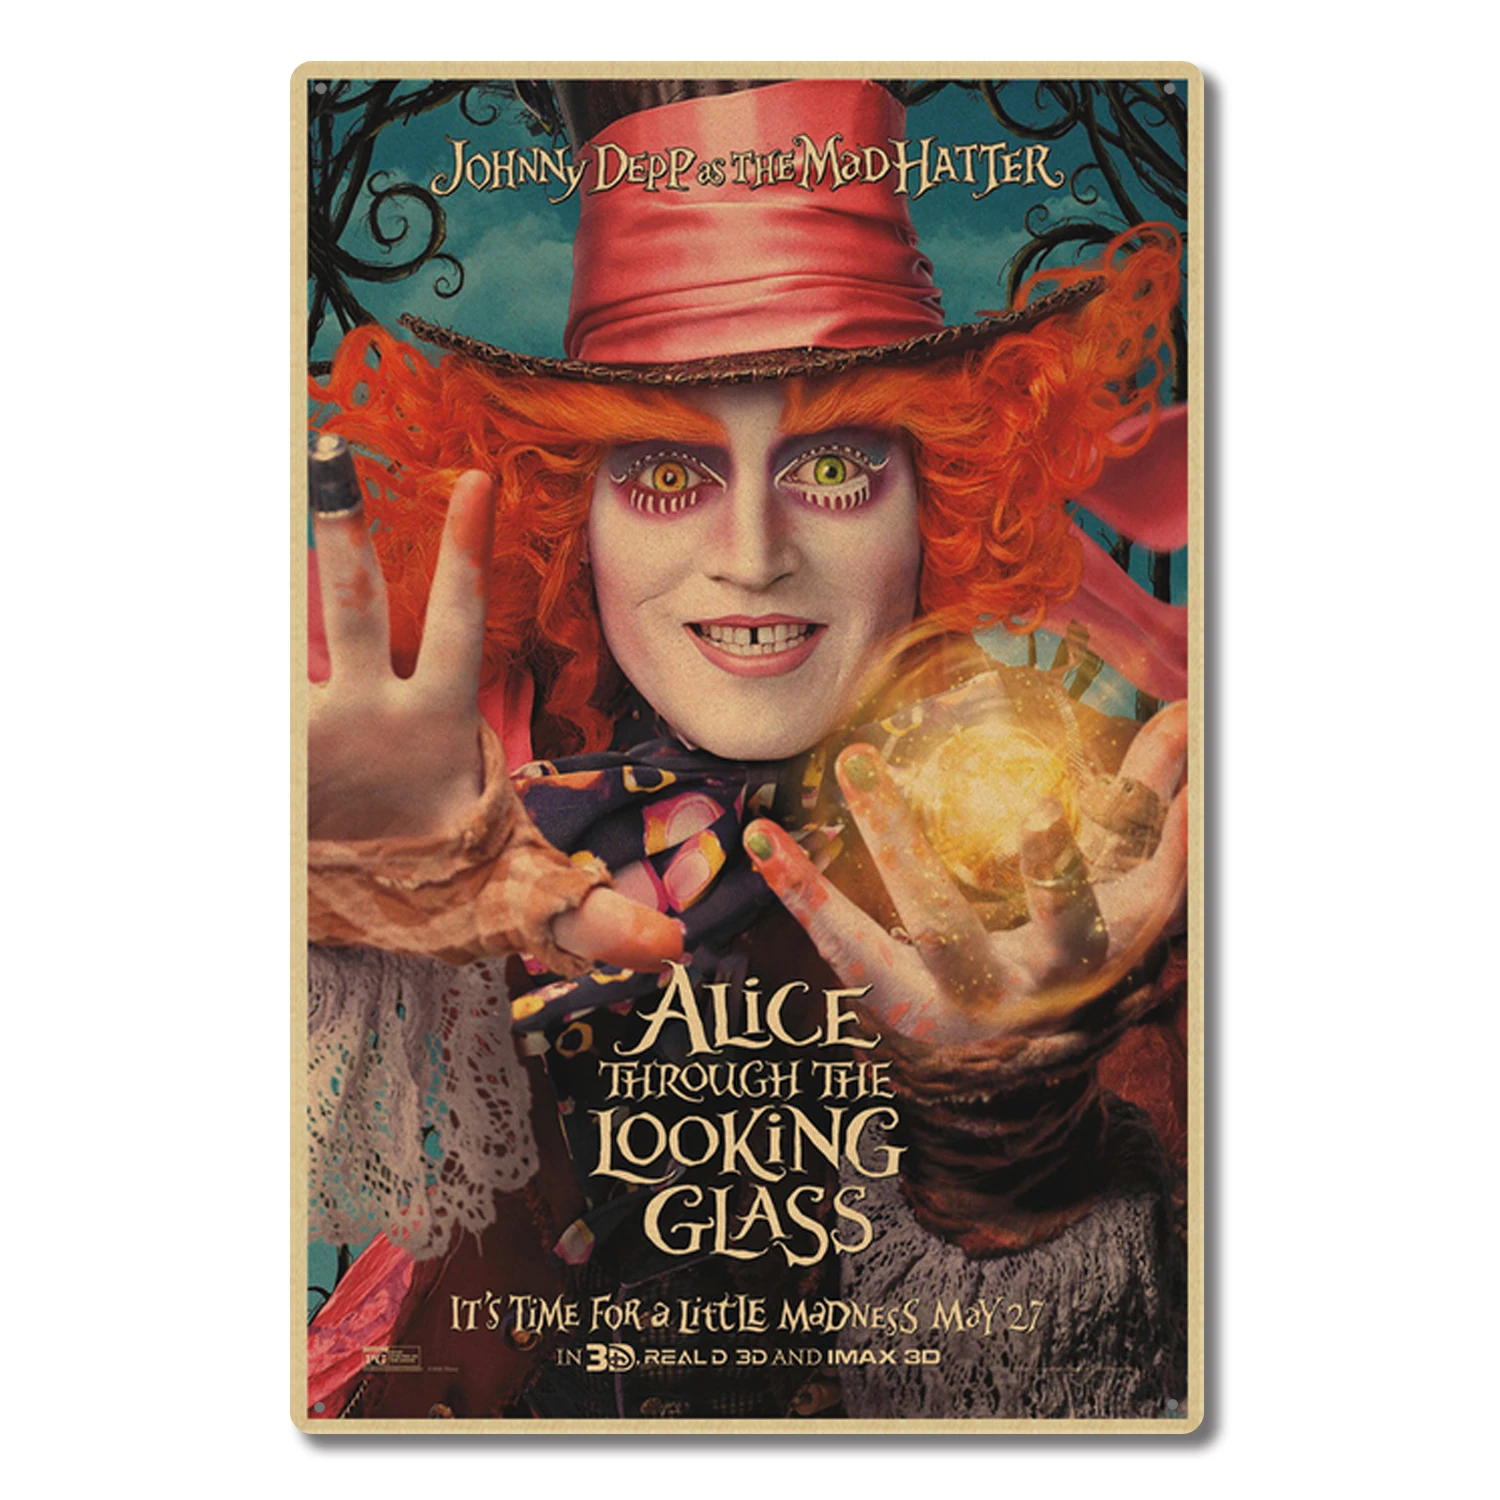 

Alice In Wonderland Vintage Metal Tin Sign Retro Movies Wall Decor for Home Bar Coffee Restaurant Art Posters Plates 12x8 Inches